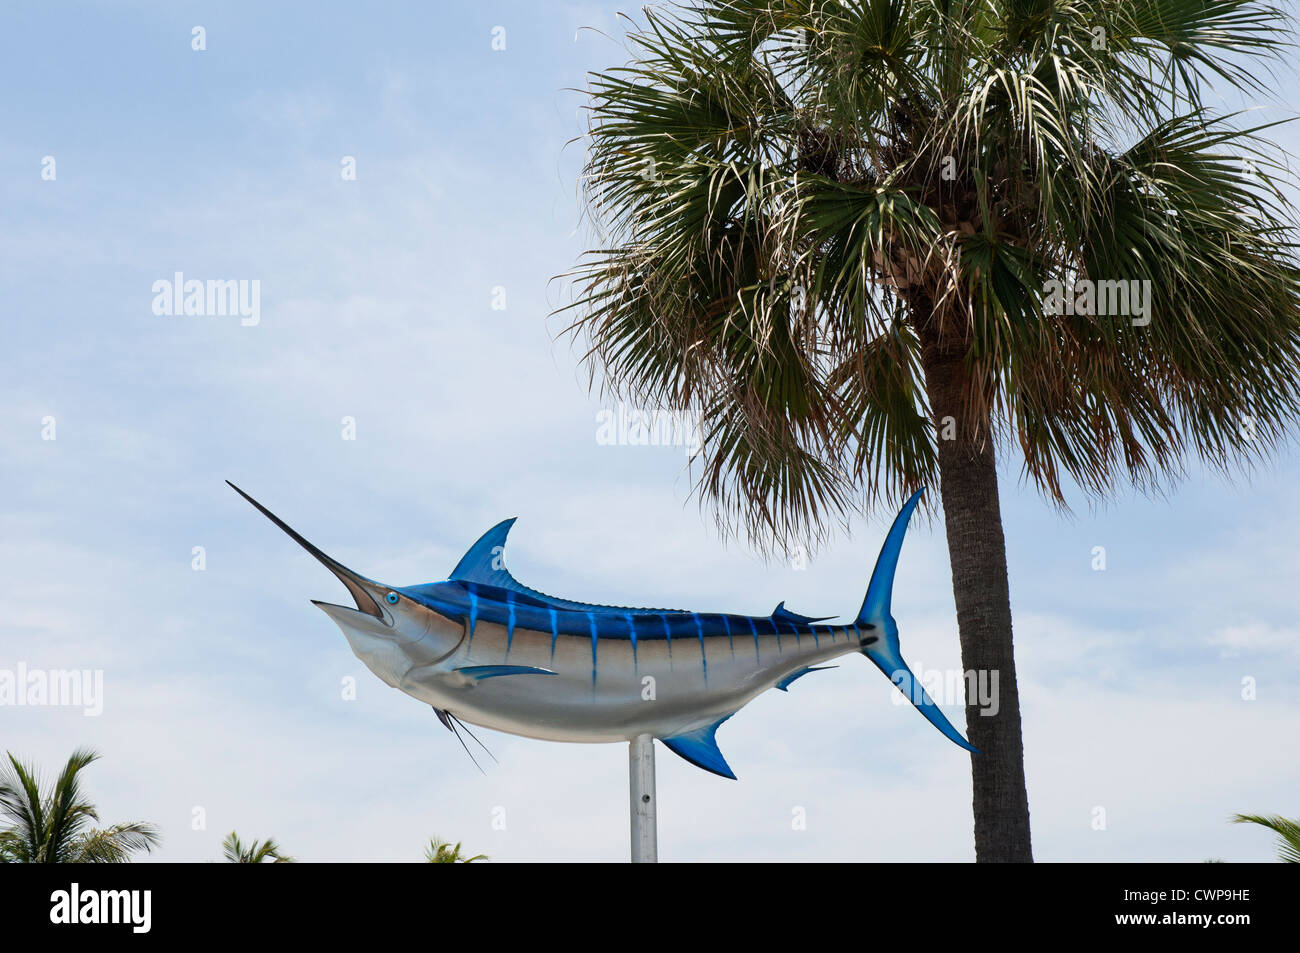 Scenes from the fishing boat area of the Bahia Mar Resort and Marina on Ft. Lauderdale, Beach, Florida. Stock Photo